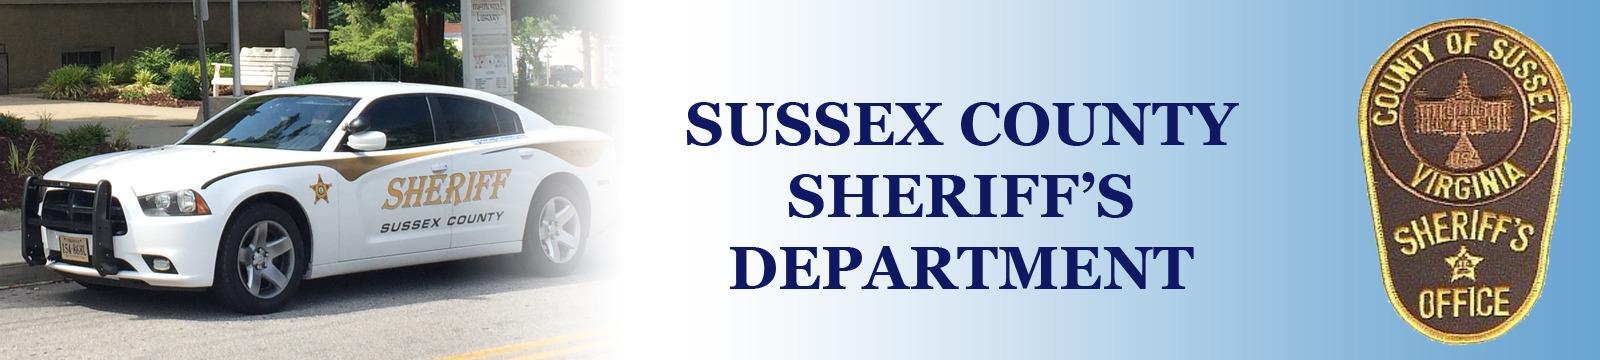 Sussex County Sheriff's Department